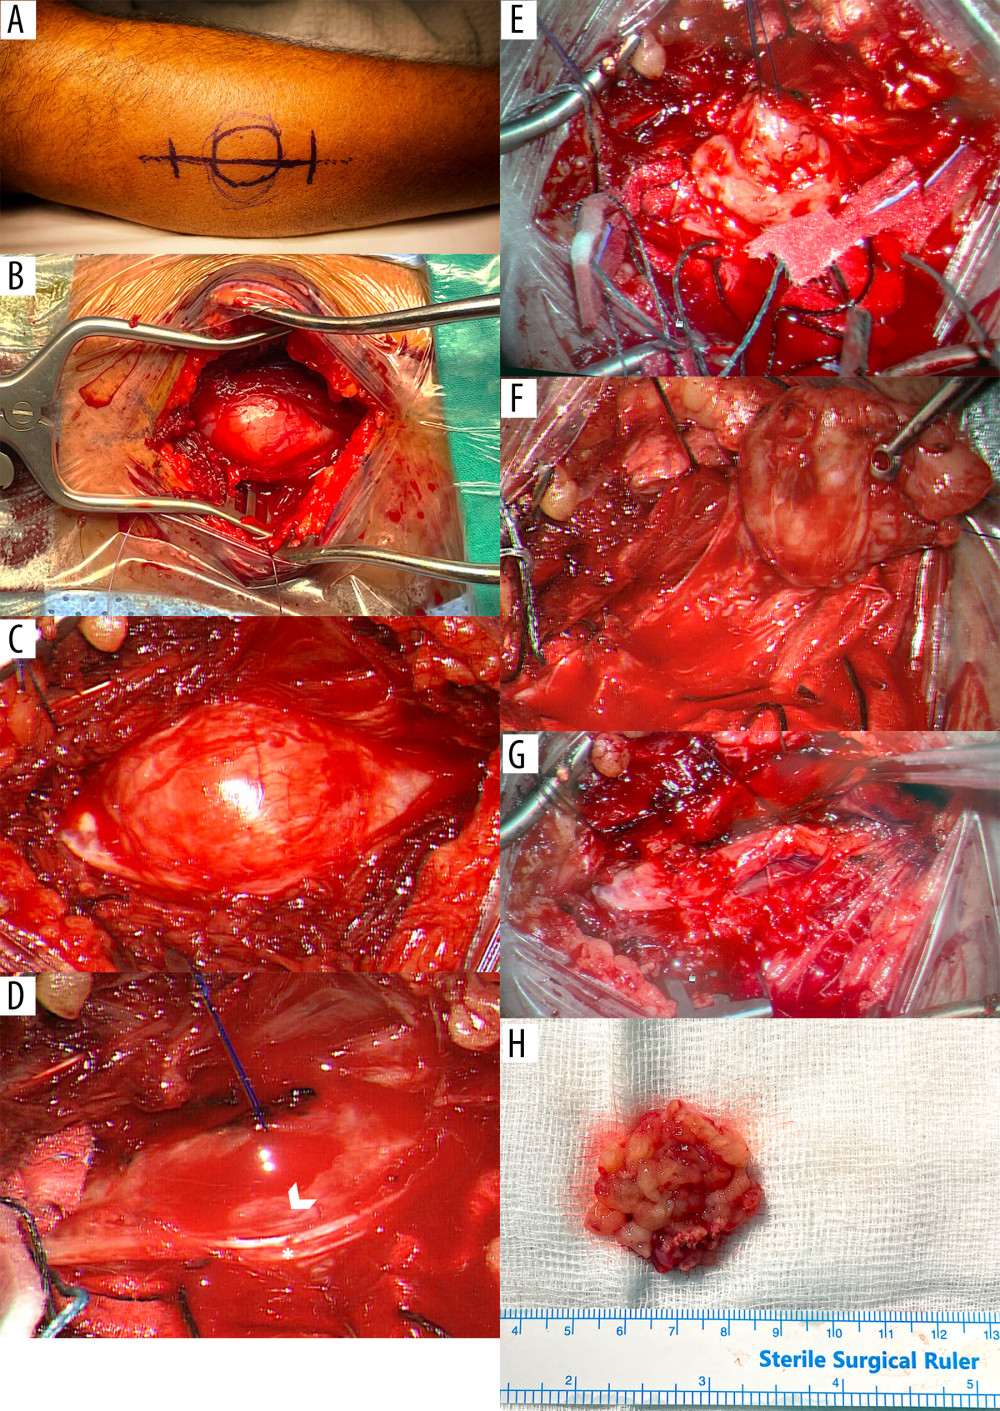 Sequential perioperative findings. Surgical excision of patient’s right upper leg tumor under microscopy. (A) Antero-lateral approach. Tumor borders defined via clinical examination and a horizontal skin incision marked. (B) Gross visualization of the lesion. (C) Microscopic visualization of the lesion. (D) Superficial peroneal nerve fascicles identified (asterisks) and was attached to the tumor (arrowhead). (E, F) Tumor exposition, dissection and enucleation performed. (G) Superficial peroneal nerve (asterisk) after excision of the tumor, with capsule left behind and epineurium sutured. (H) Gross appearance of the tumor measuring 3.5×2.0×1.0 cm.